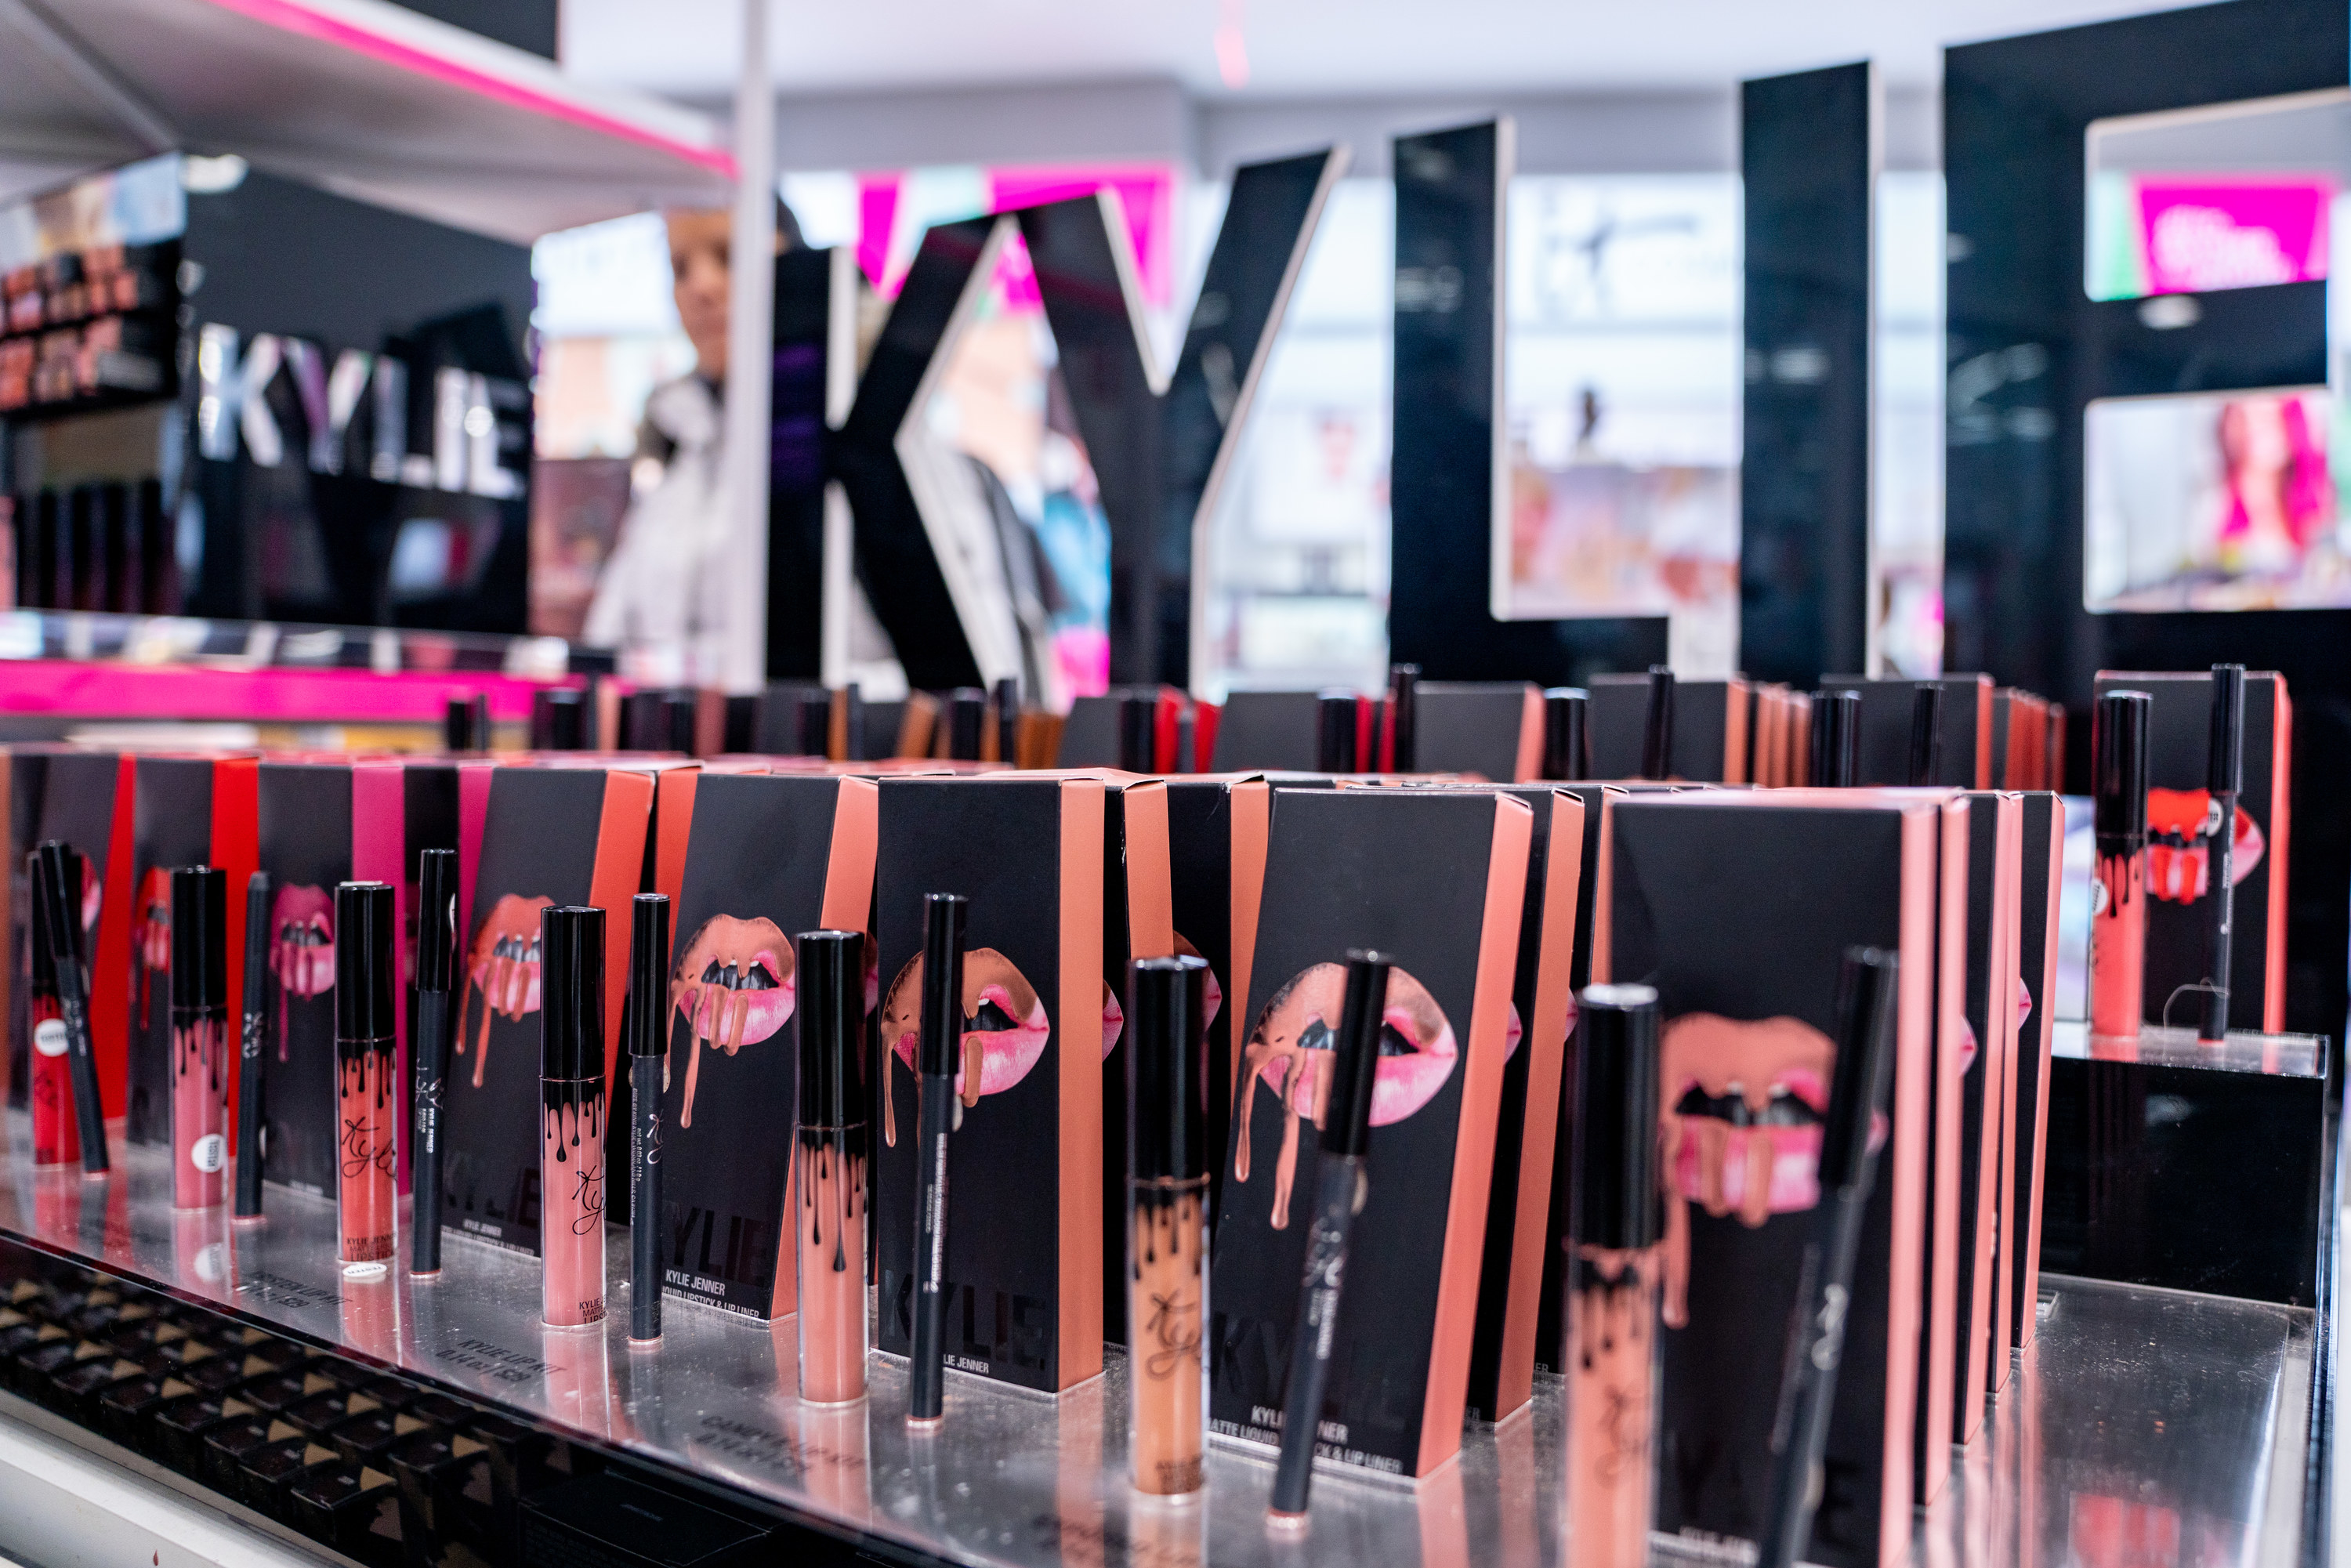 A display in a store showing Kylie Cosmetics lip kits